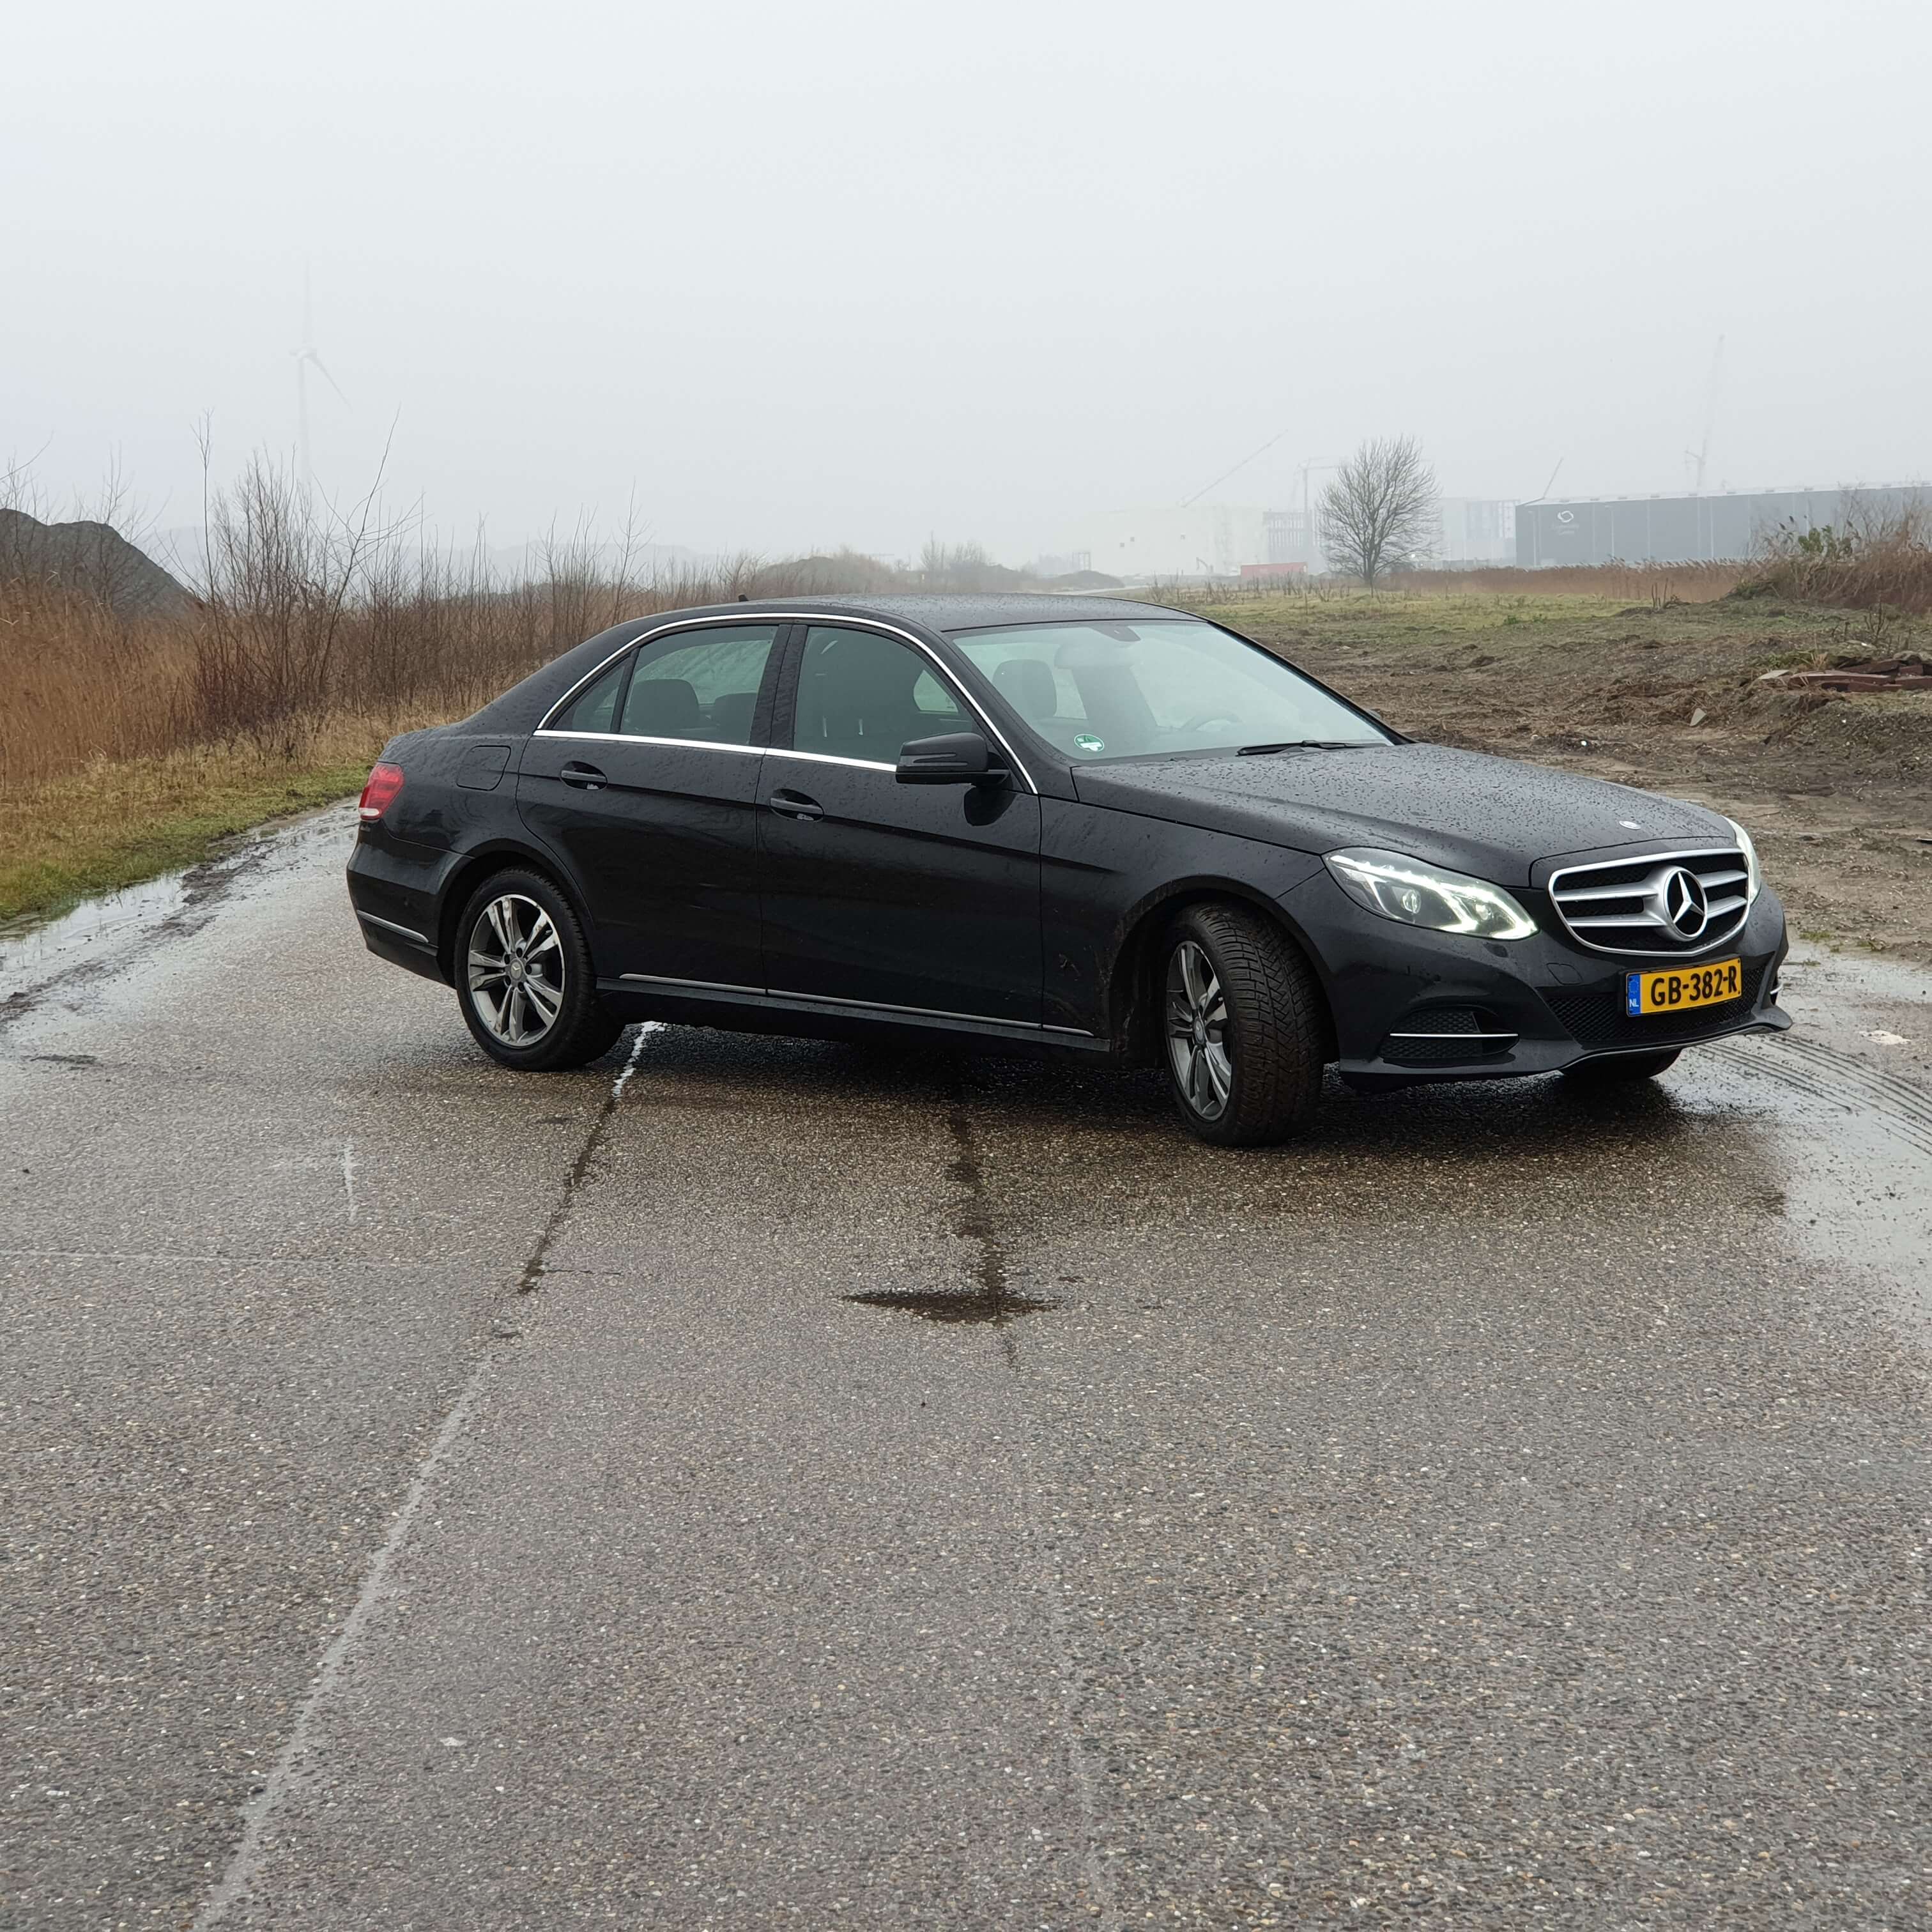 Hire a 3 seater Car with driver (Mercedes Benz E Klasse 2021) from Direct Vip Service in Amsterdam 